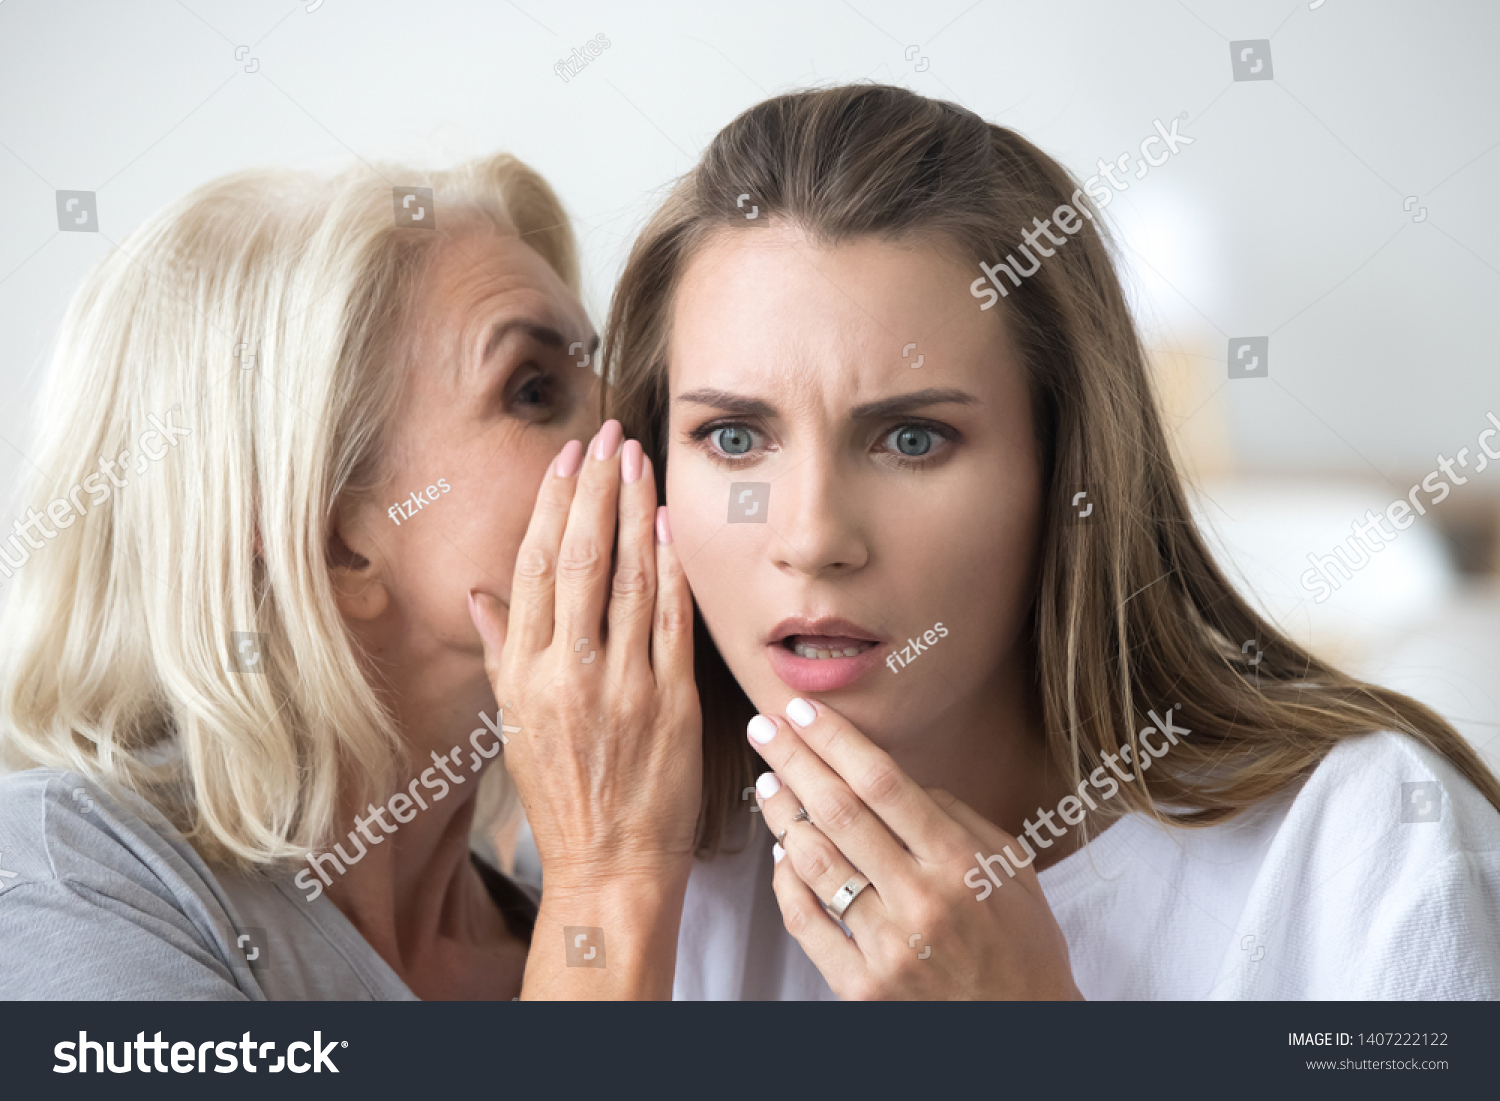 Close up portrait attractive middle aged woman whispering gossiping to ear a secret to millennial female sitting together at home. Best friends trusting relations between mother and daughter concept #1407222122